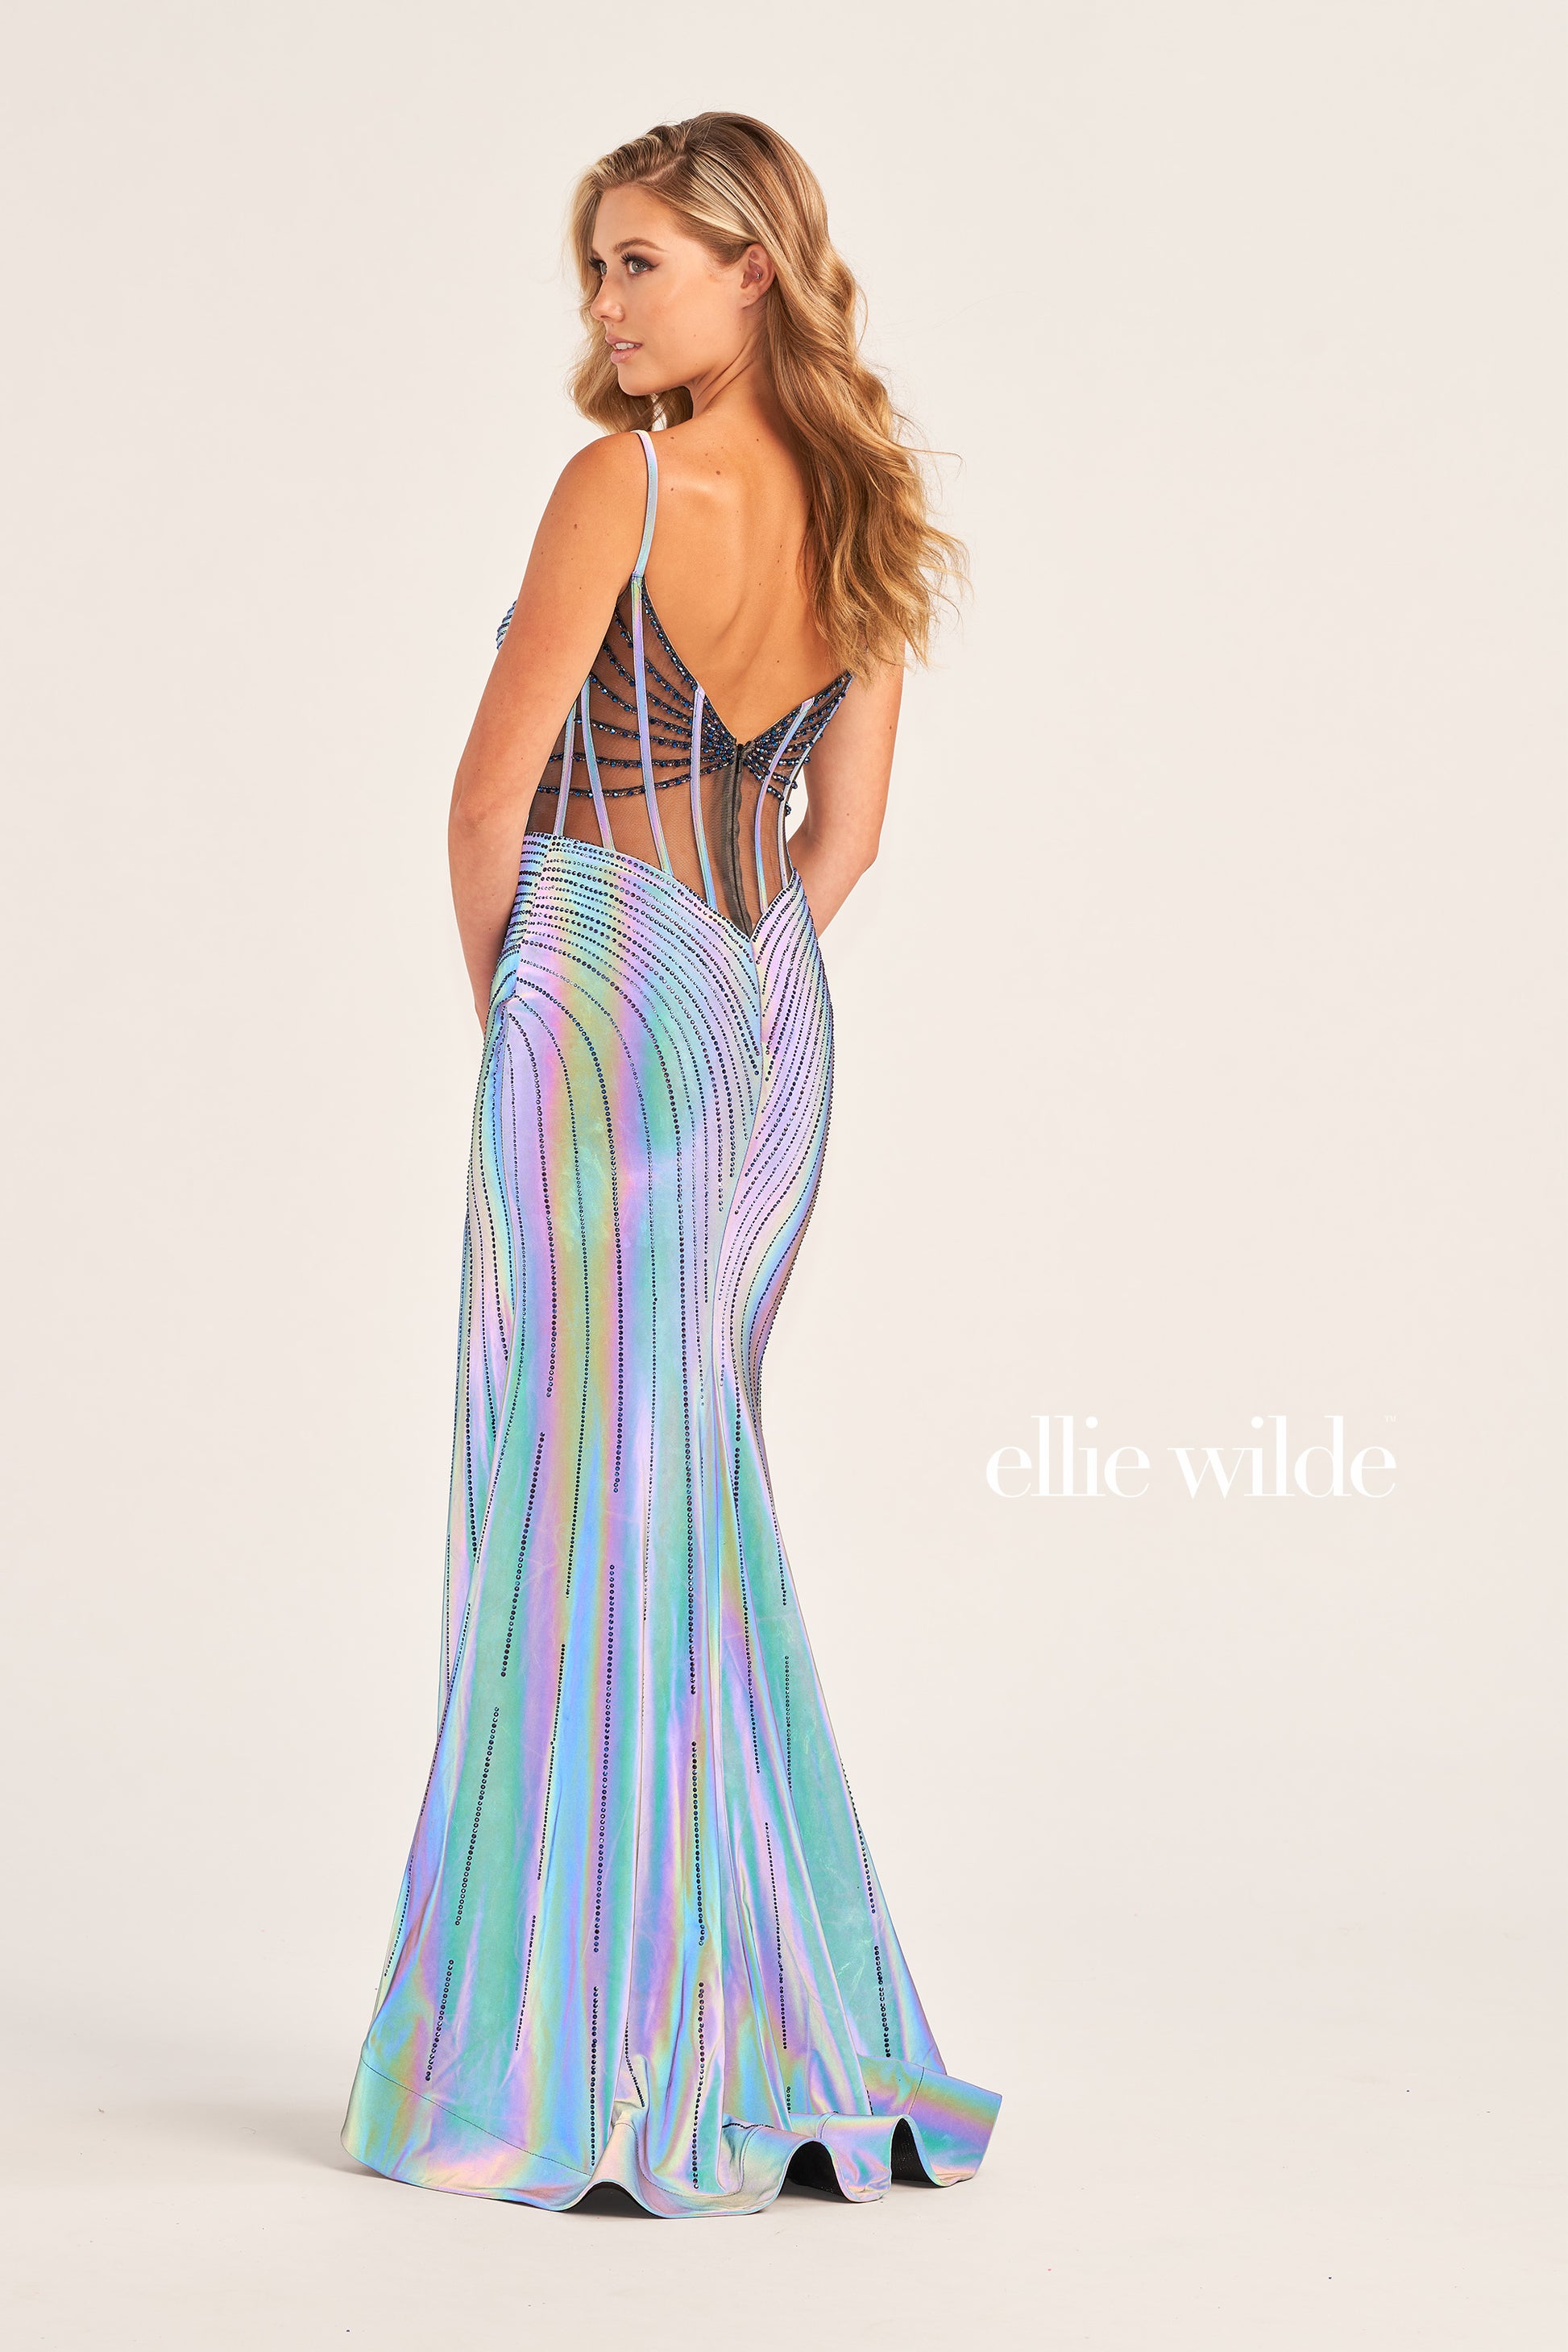 The Ellie Wilde EW35702 SUPERNOVA Holographic Sheer Corset Prom Dress Slit V Neck Gown is perfect for special occasions. Crafted with a romantic sheer illusion bodice, intricate metallic beading, and a striking slit skirt, this gown is the perfect combination of glamour and femininity. The corset bodice ensures a flattering fit, while the unexpected cut of the neckline adds drama and sophistication. Nothing gets more wows than this!